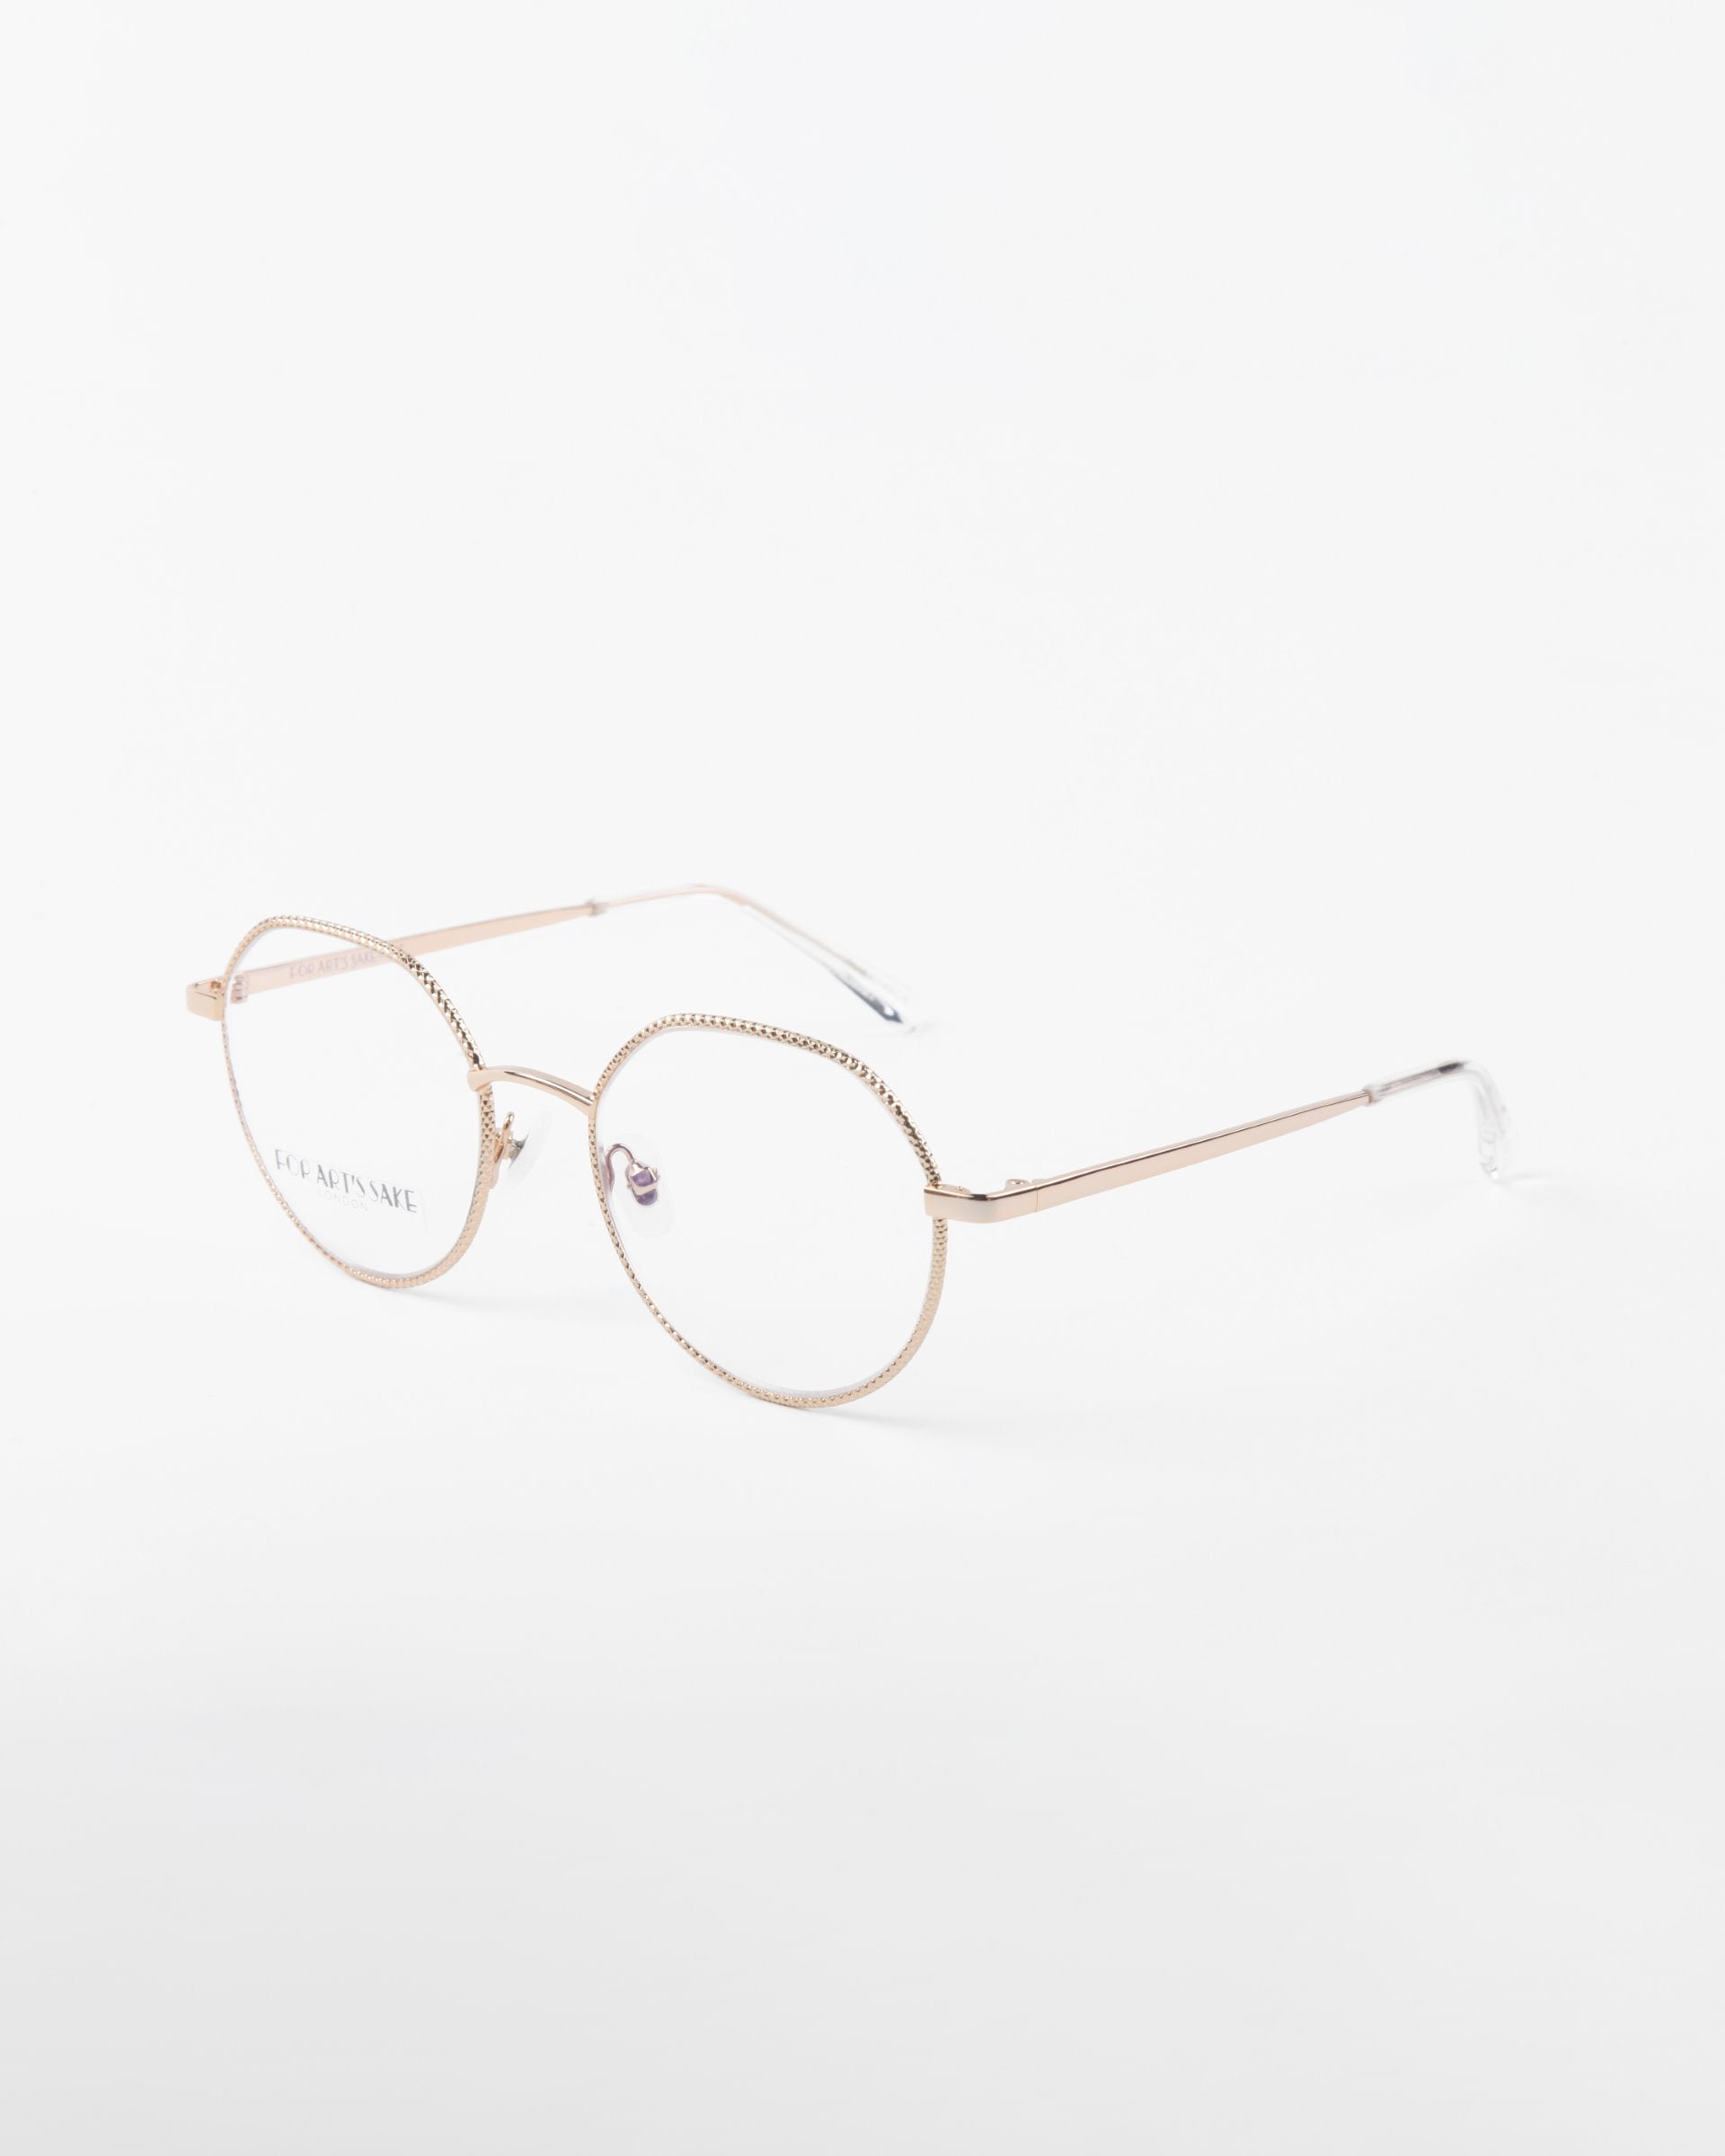 A pair of 18-karat gold-plated, round eyeglasses with clear lenses positioned at an angle against a white background. The frames have a thin, delicate design with a slight pattern on the rims. The temples are slender and straight with clear plastic tips. Perfect for adding blue light filter or prescription service! These are the Hope eyeglasses by For Art's Sake®.